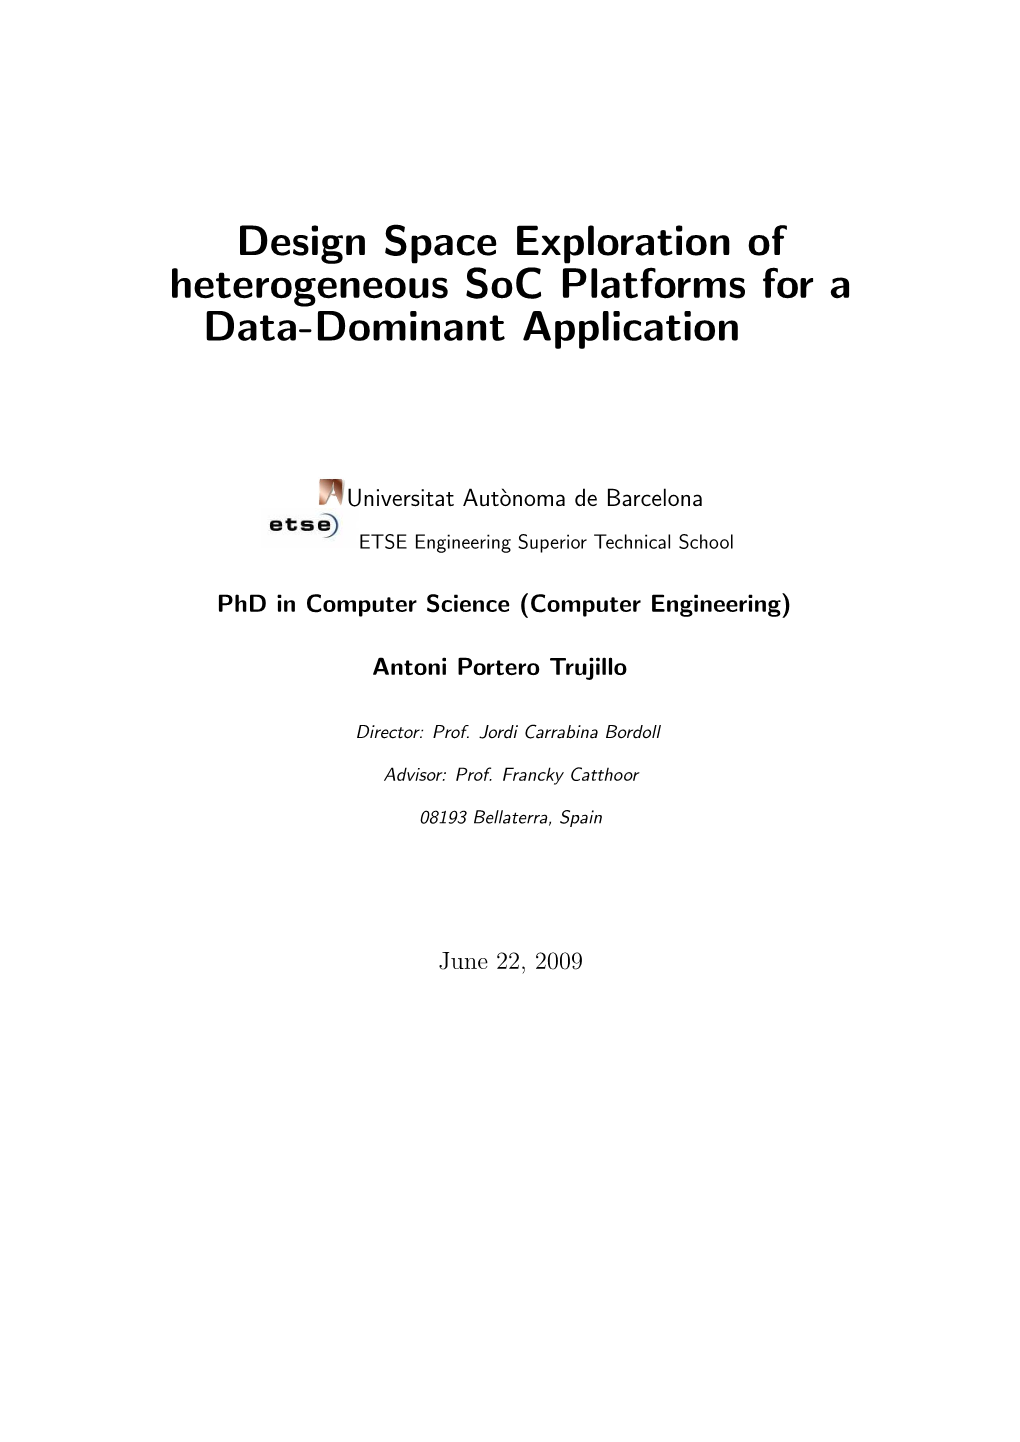 Design Space Exploration of Heterogeneous Soc Platforms for a Data-Dominant Application